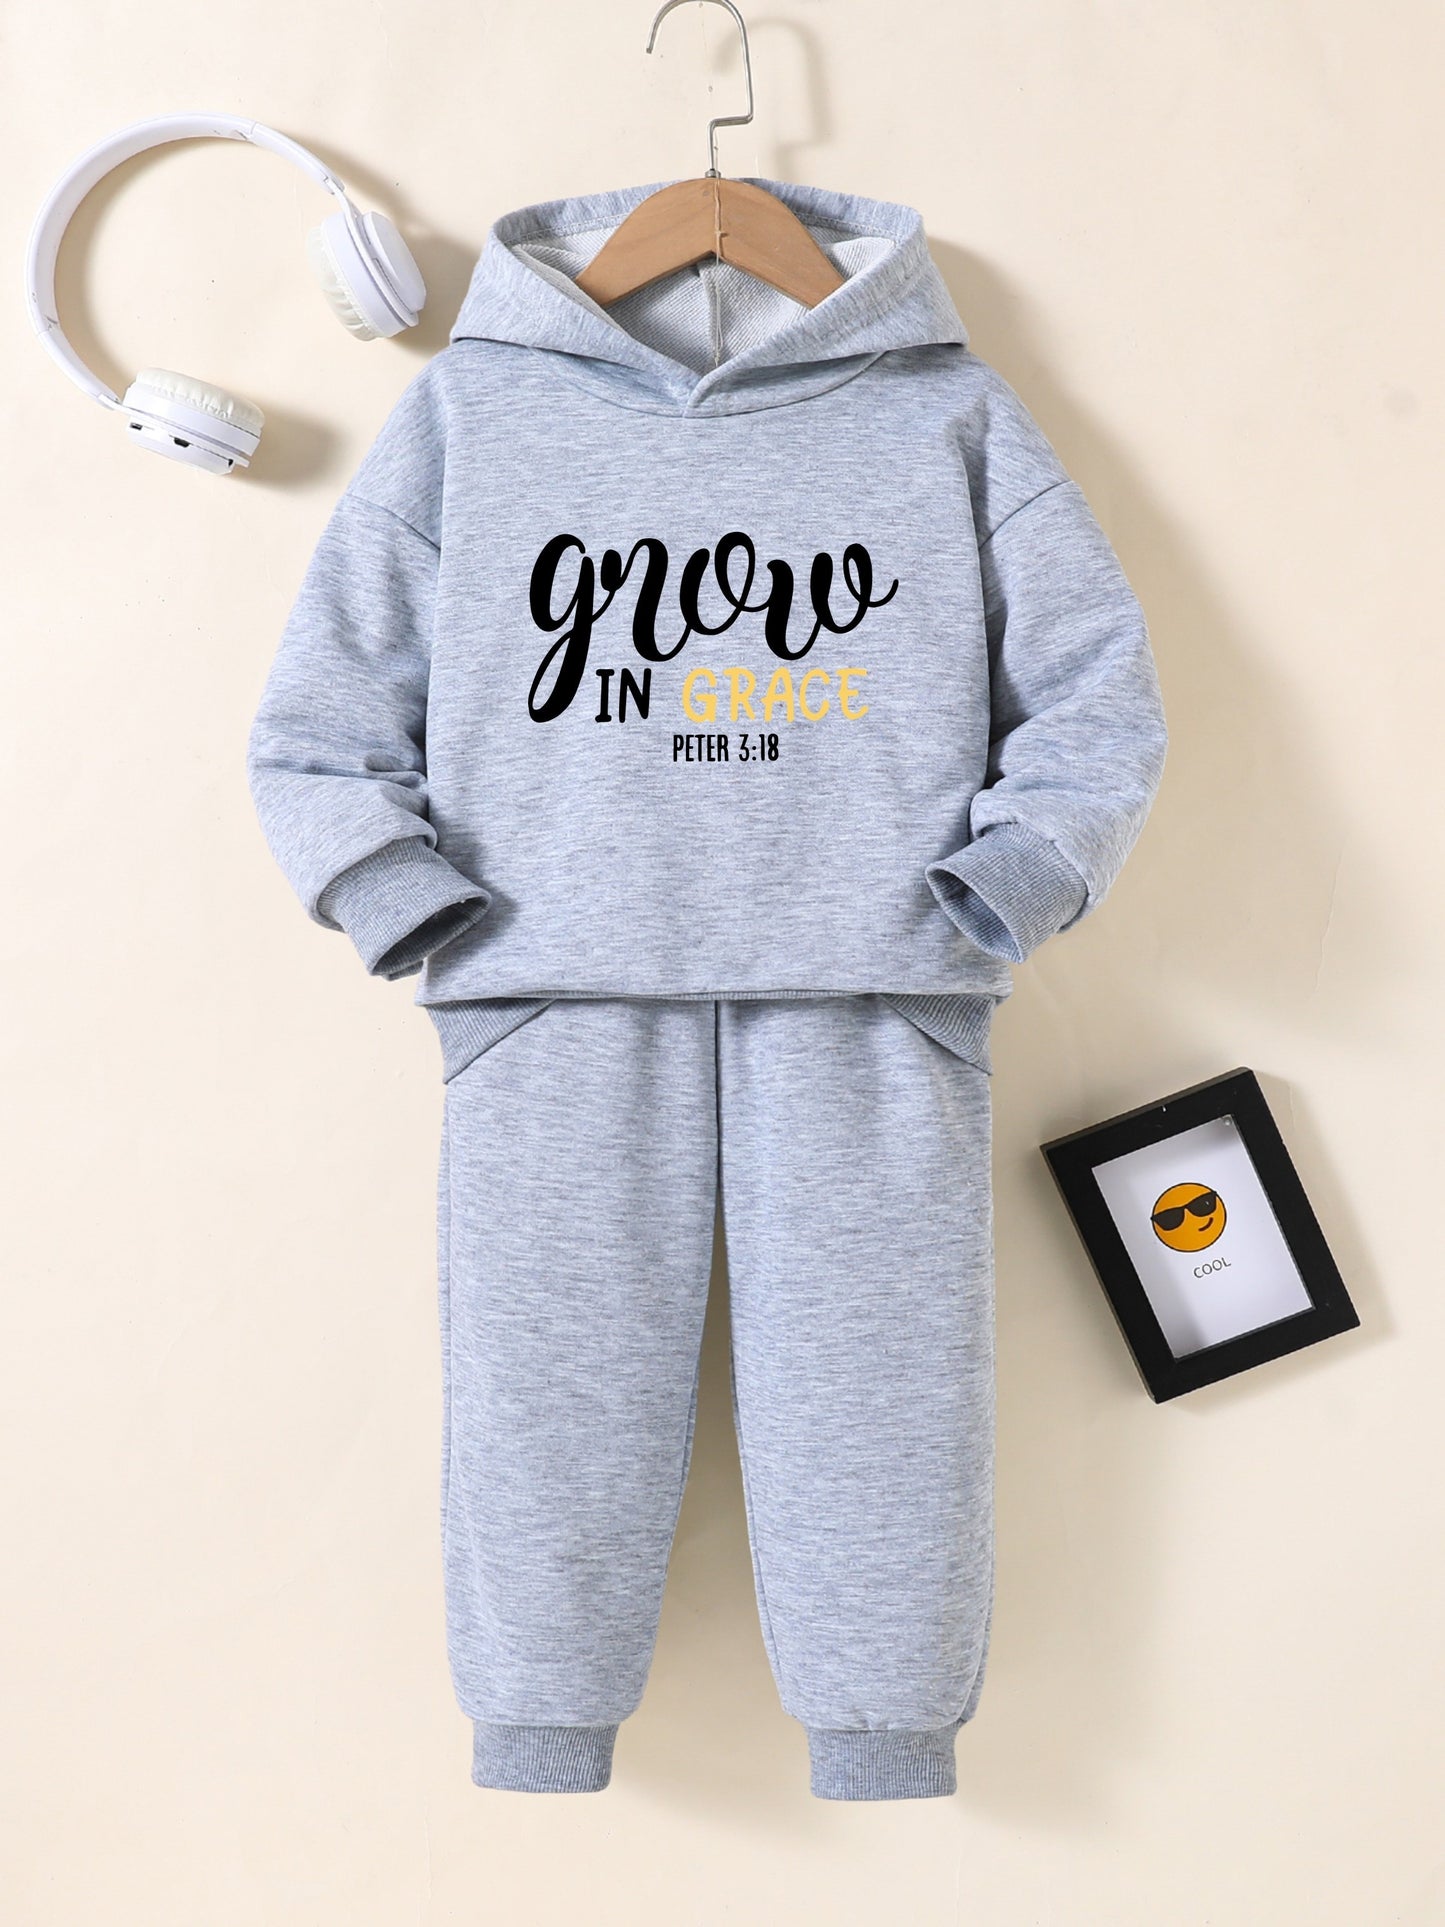 GROW IN GRACE Youth Christian Casual Outfit claimedbygoddesigns